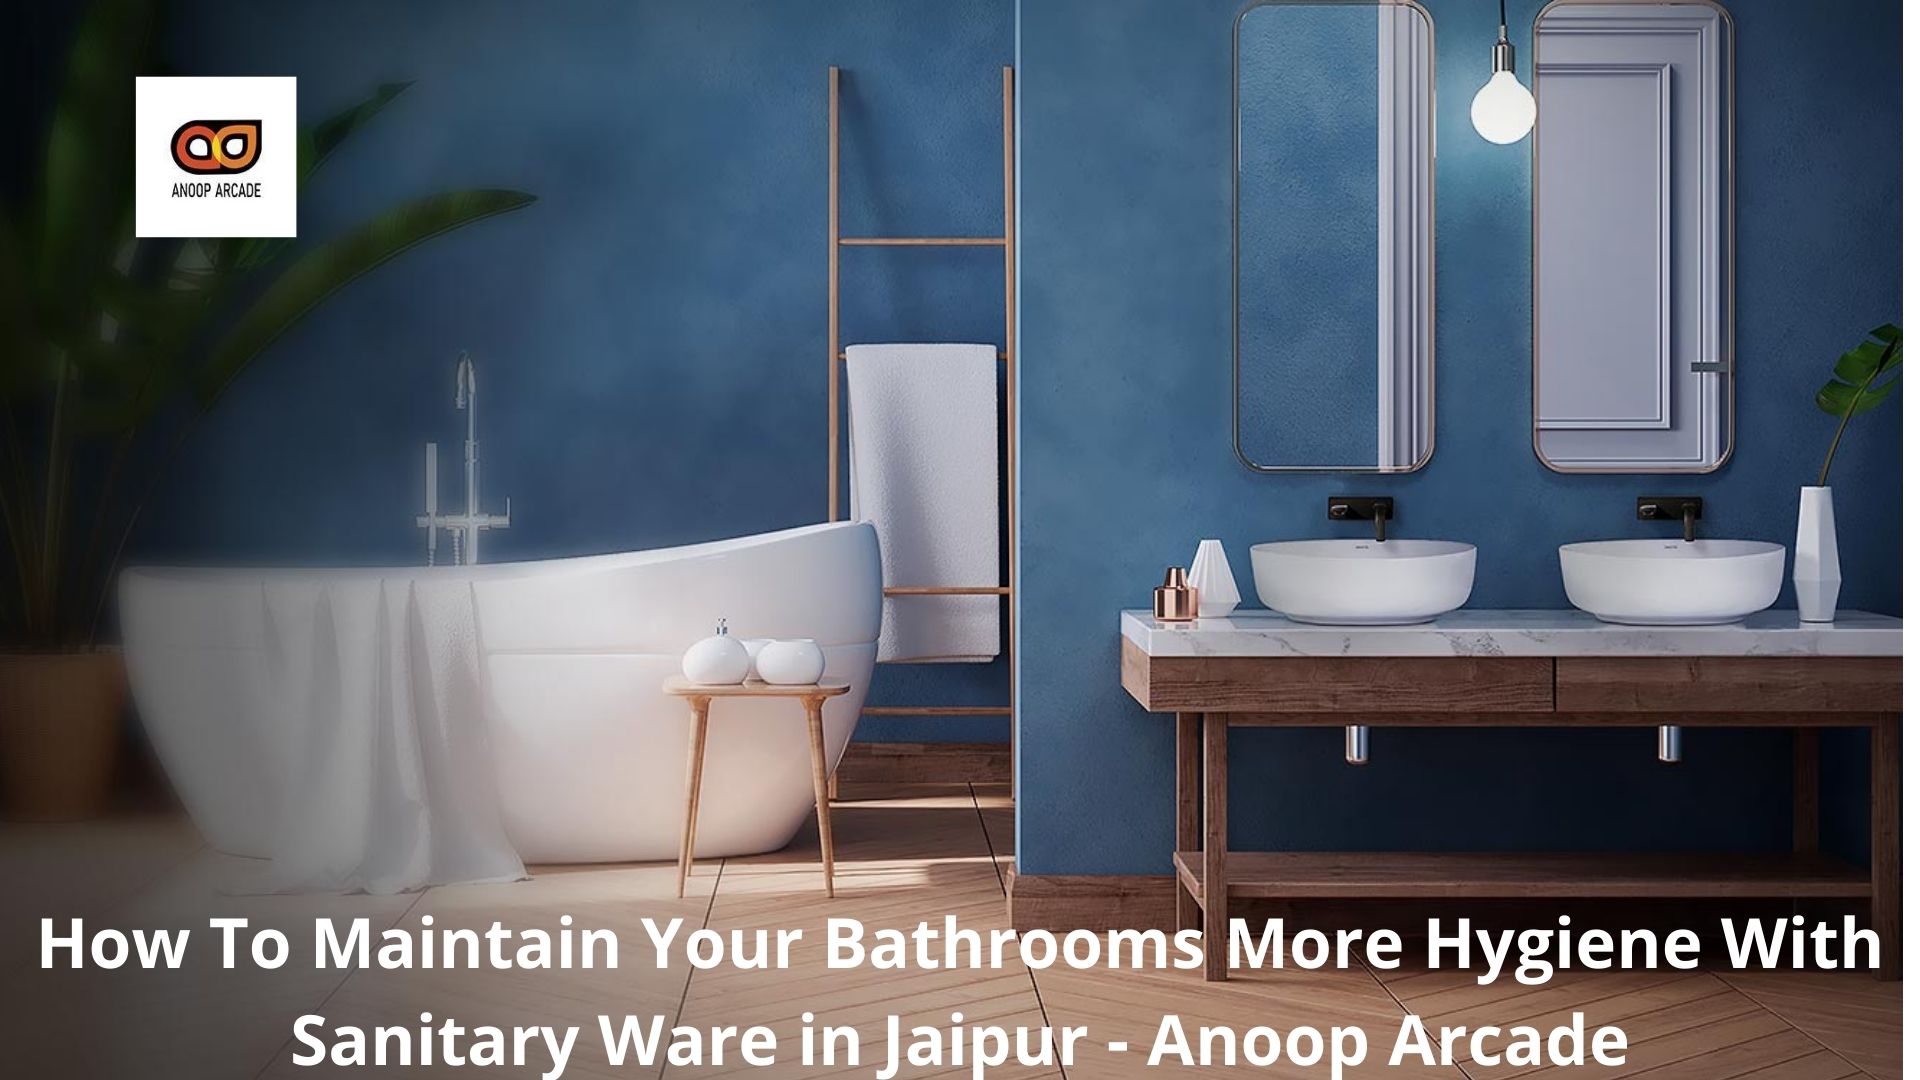 How To Maintain Your Bathrooms More Hygiene With Sanitary Ware in Jaipur - Anoop Arcade